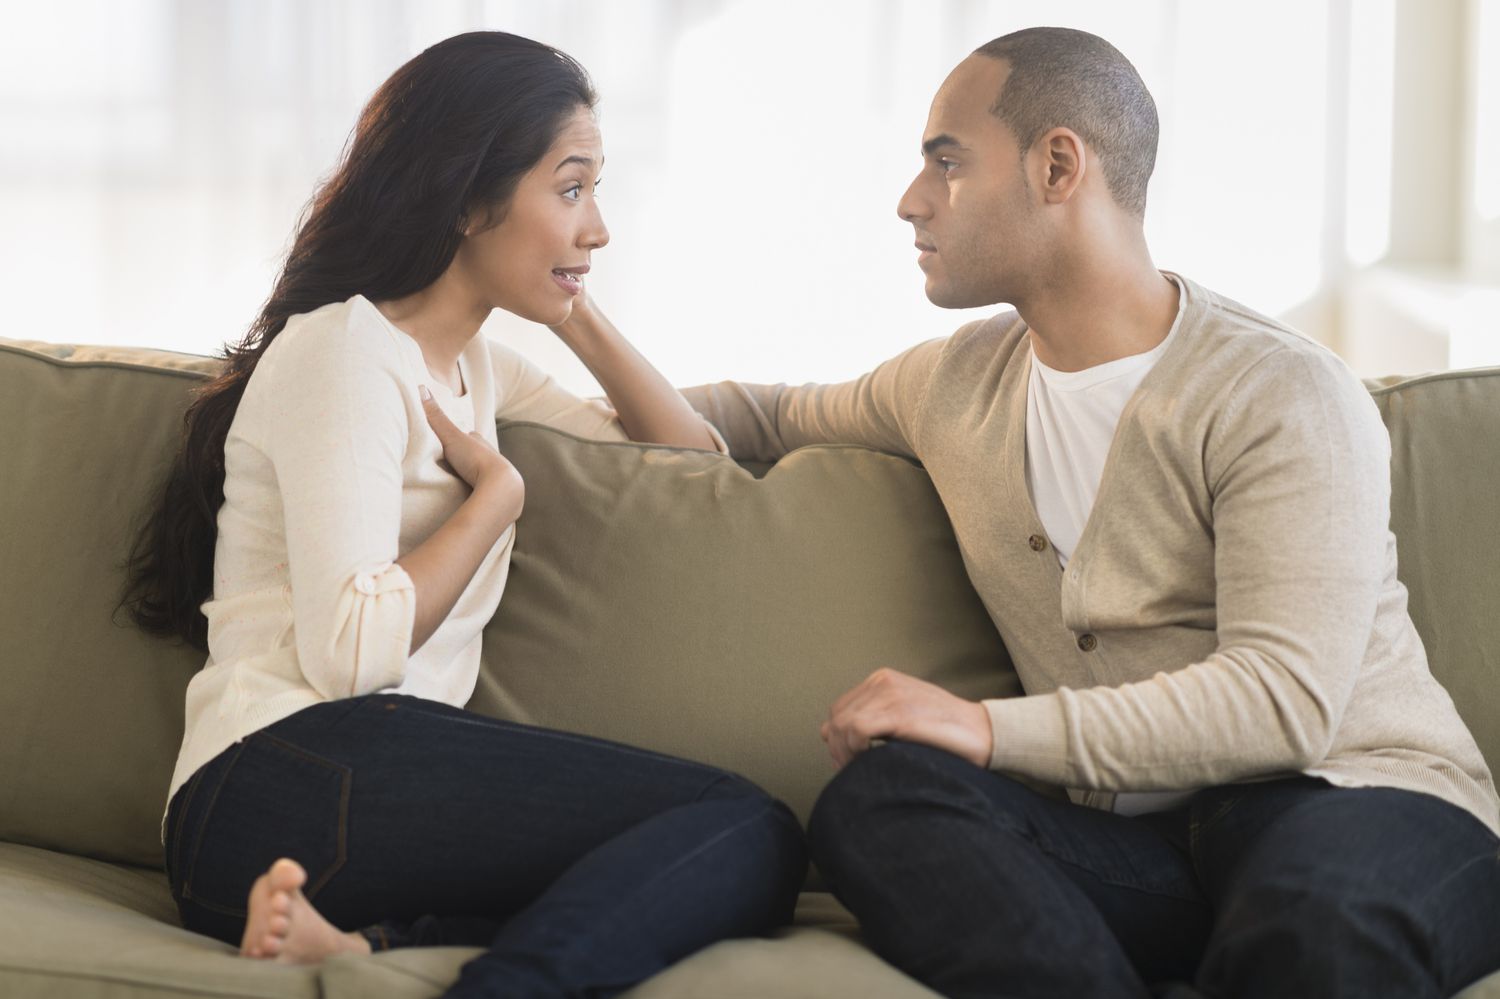 How to Communicate Feeling Neglected to Partner